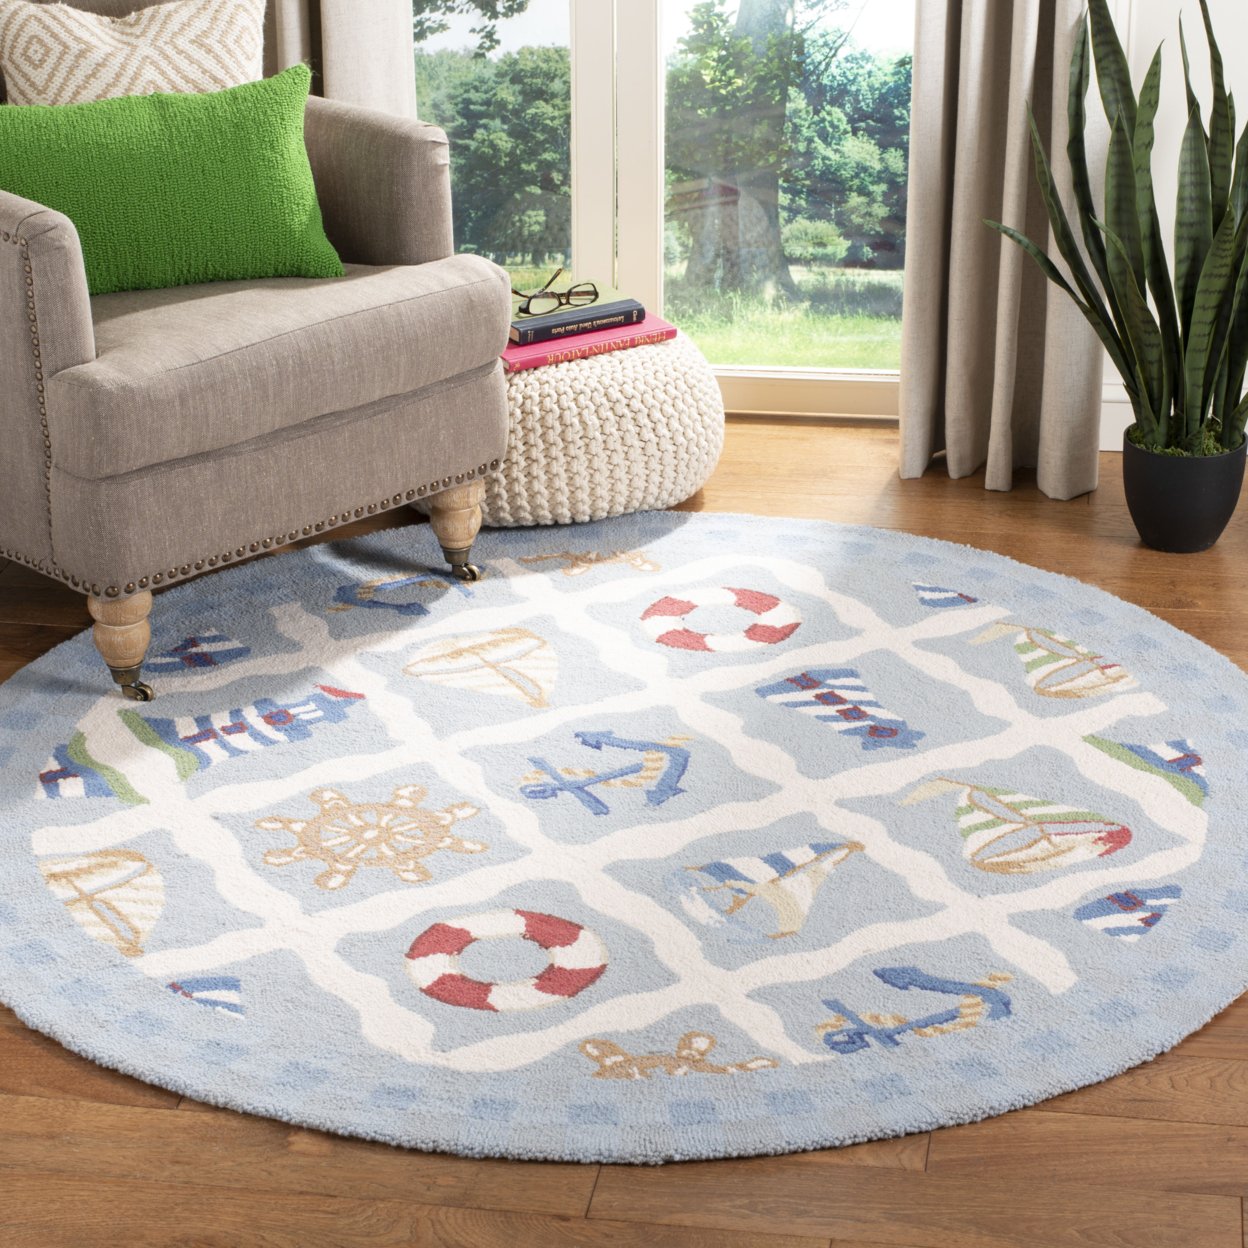 SAFAVIEH Chelsea Collection HK239A Hand-hooked Ivory Rug - 7' 6 X 9' 6 Oval